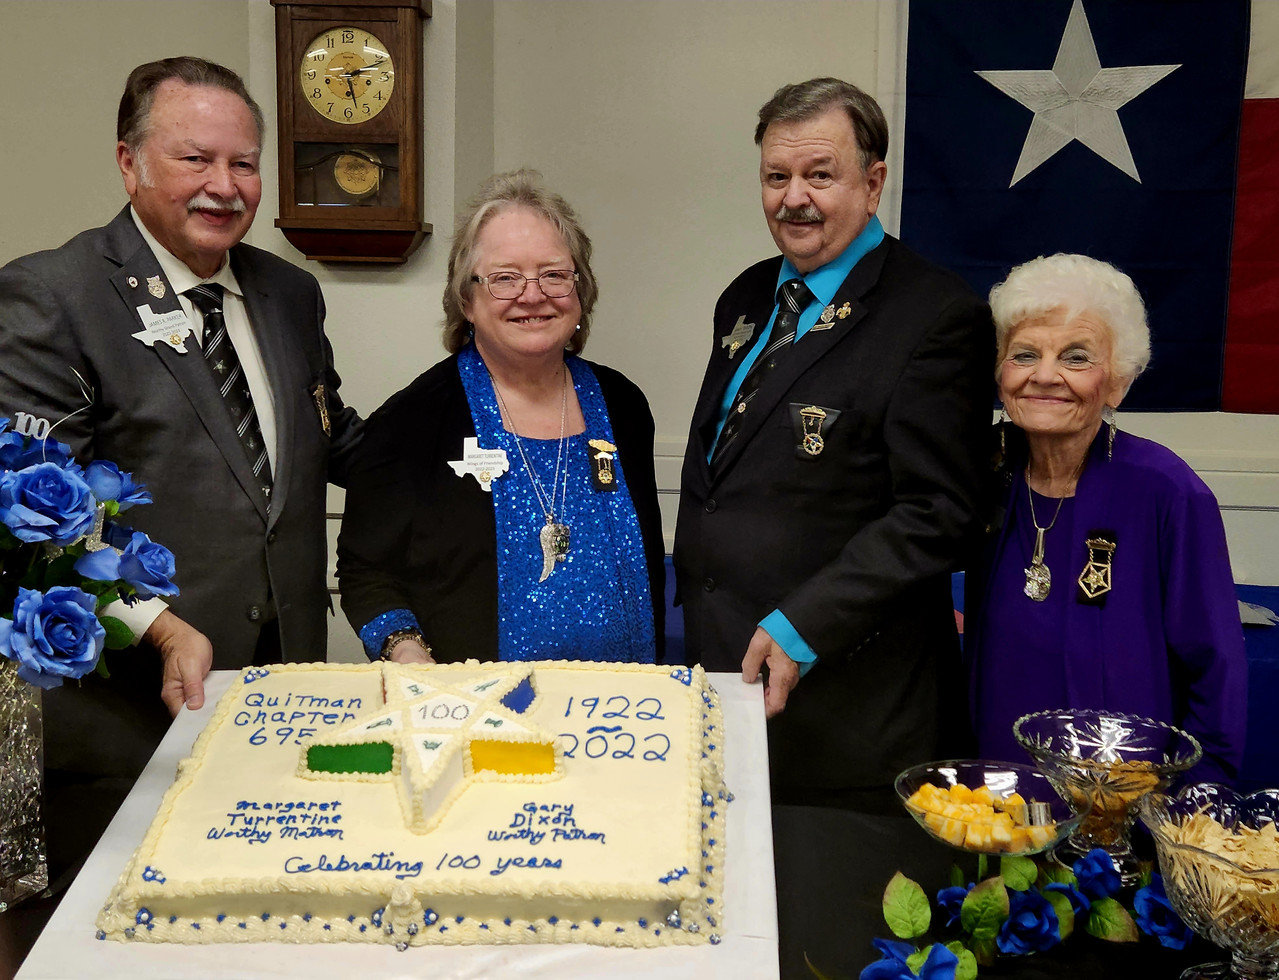 From left, James R. Parker, Worthy Grand Patron; Margaret Turrentine, Worthy Matron; Gary Dixon, Worthy Patron; and Phyllis Macon, Worthy Grand Patron with the 100th anniversary cake.